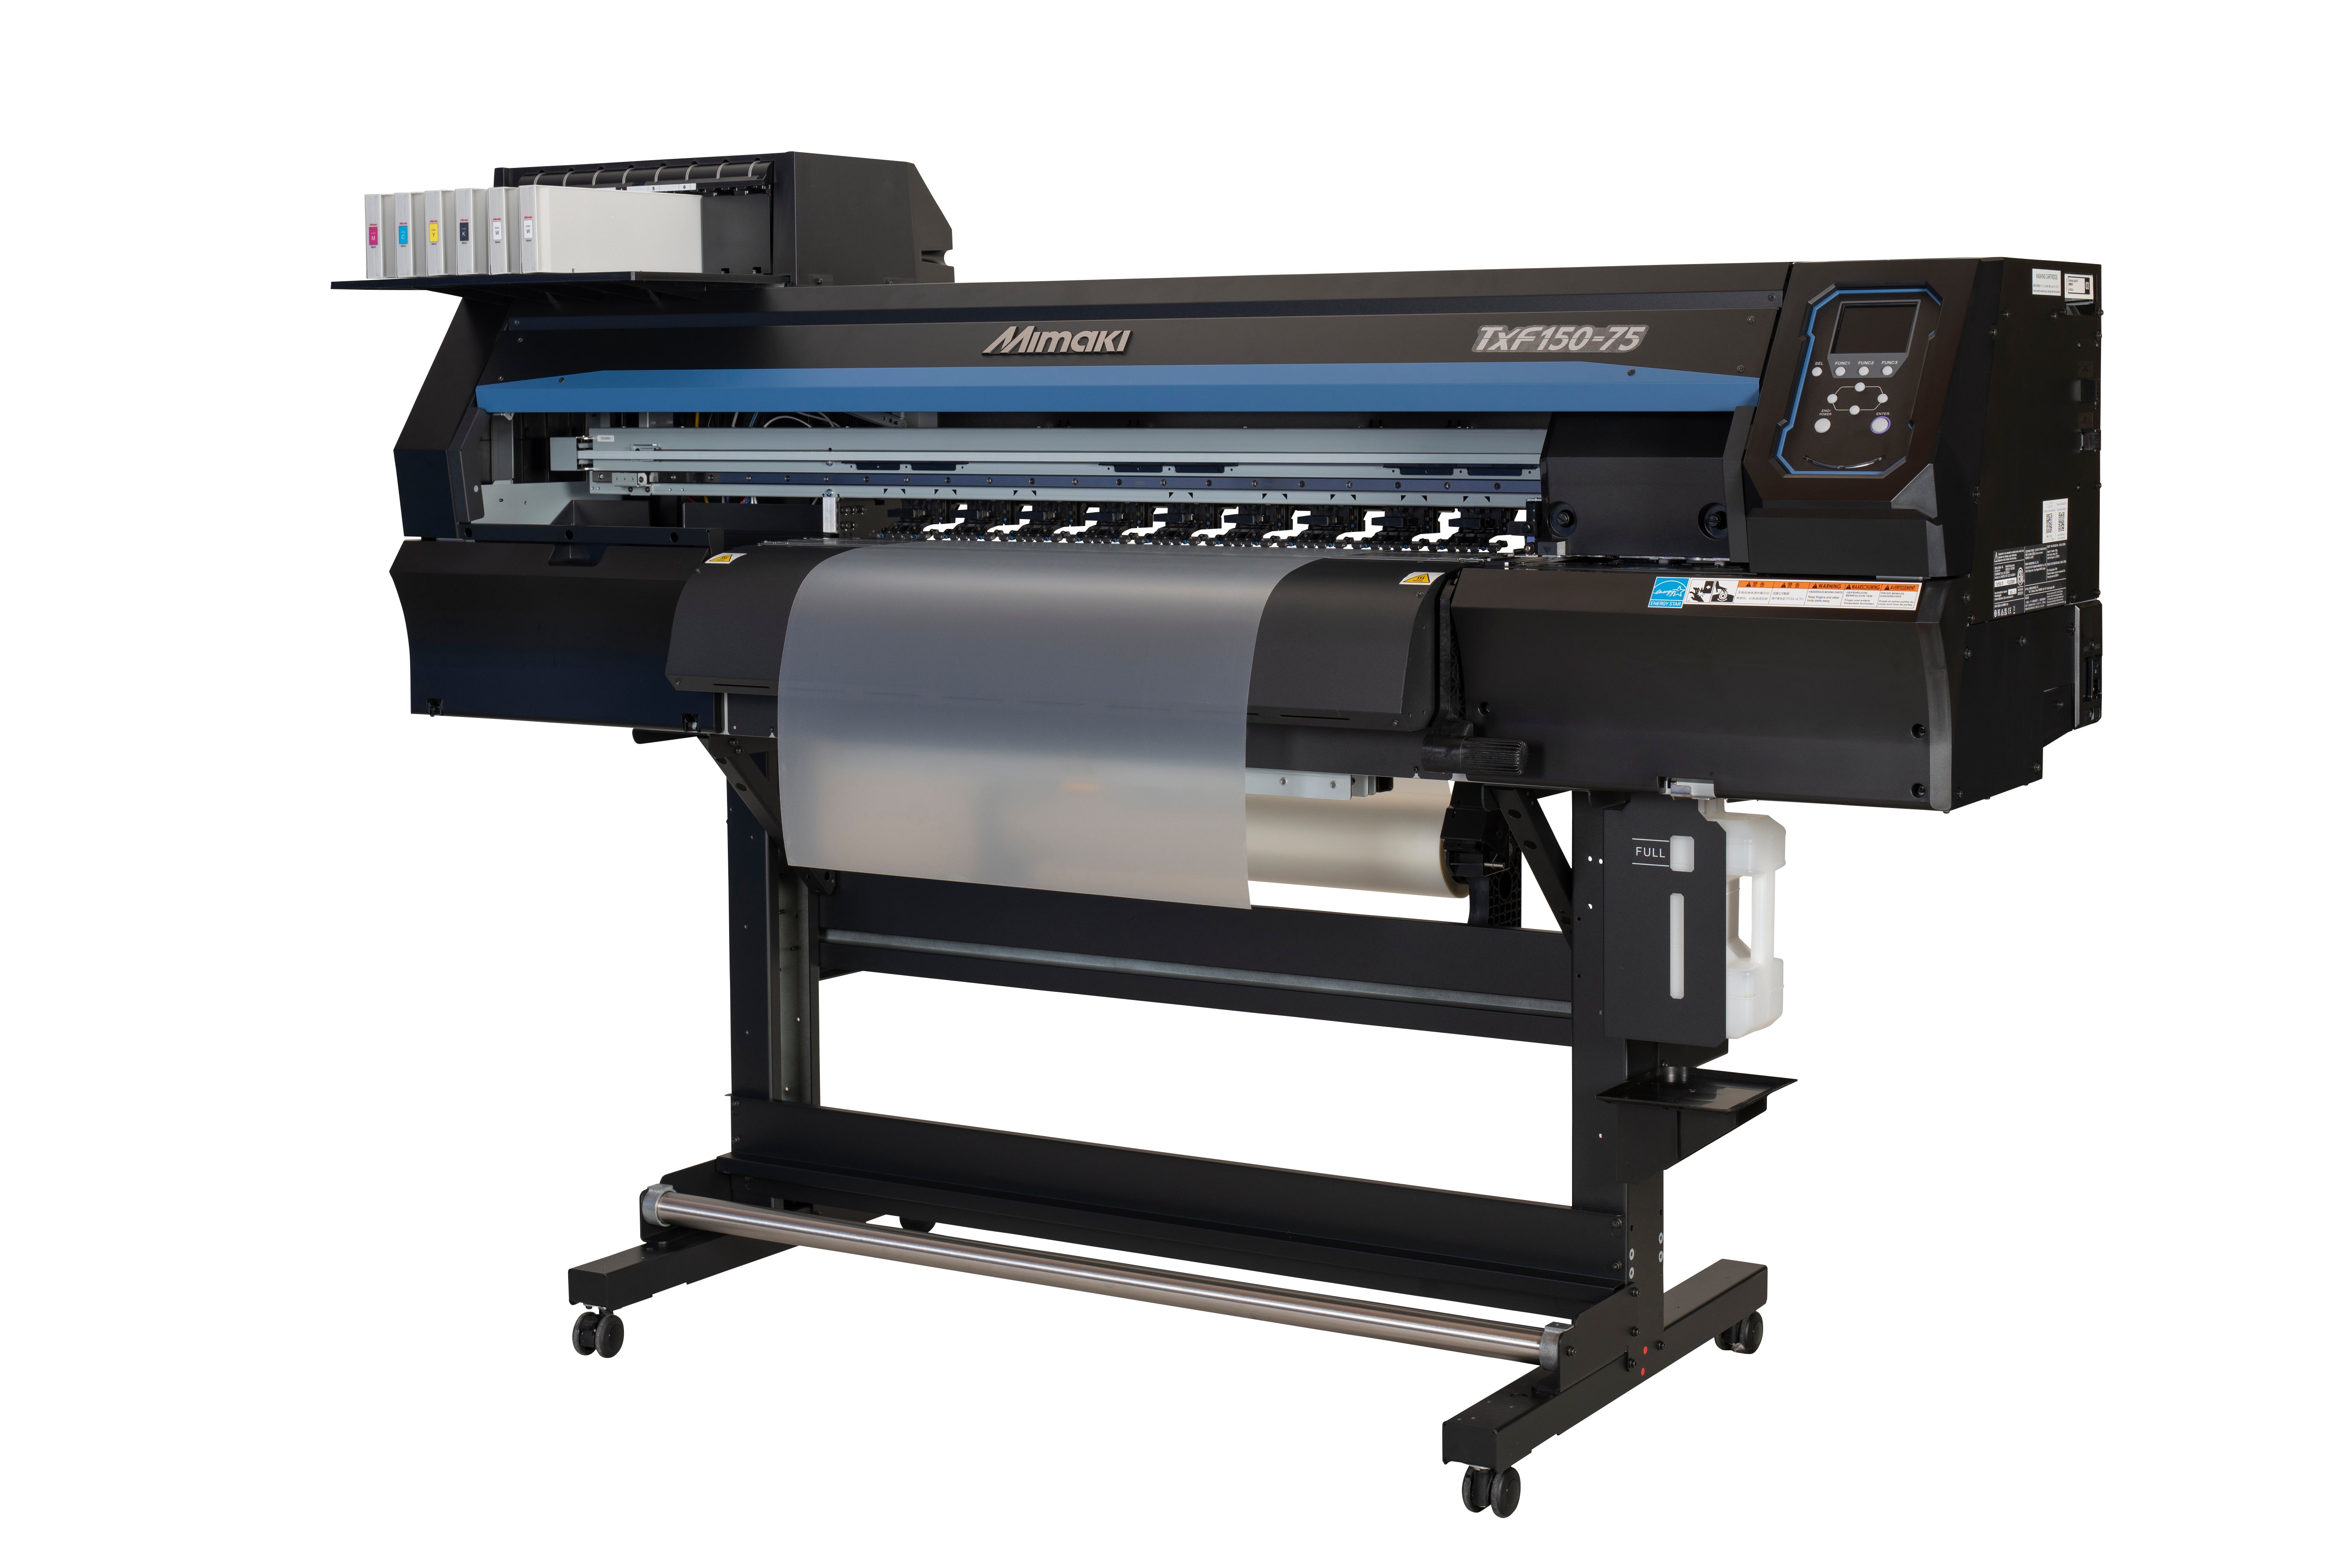 Mimaki TxF 150-75 right side of printer showng media being printed on